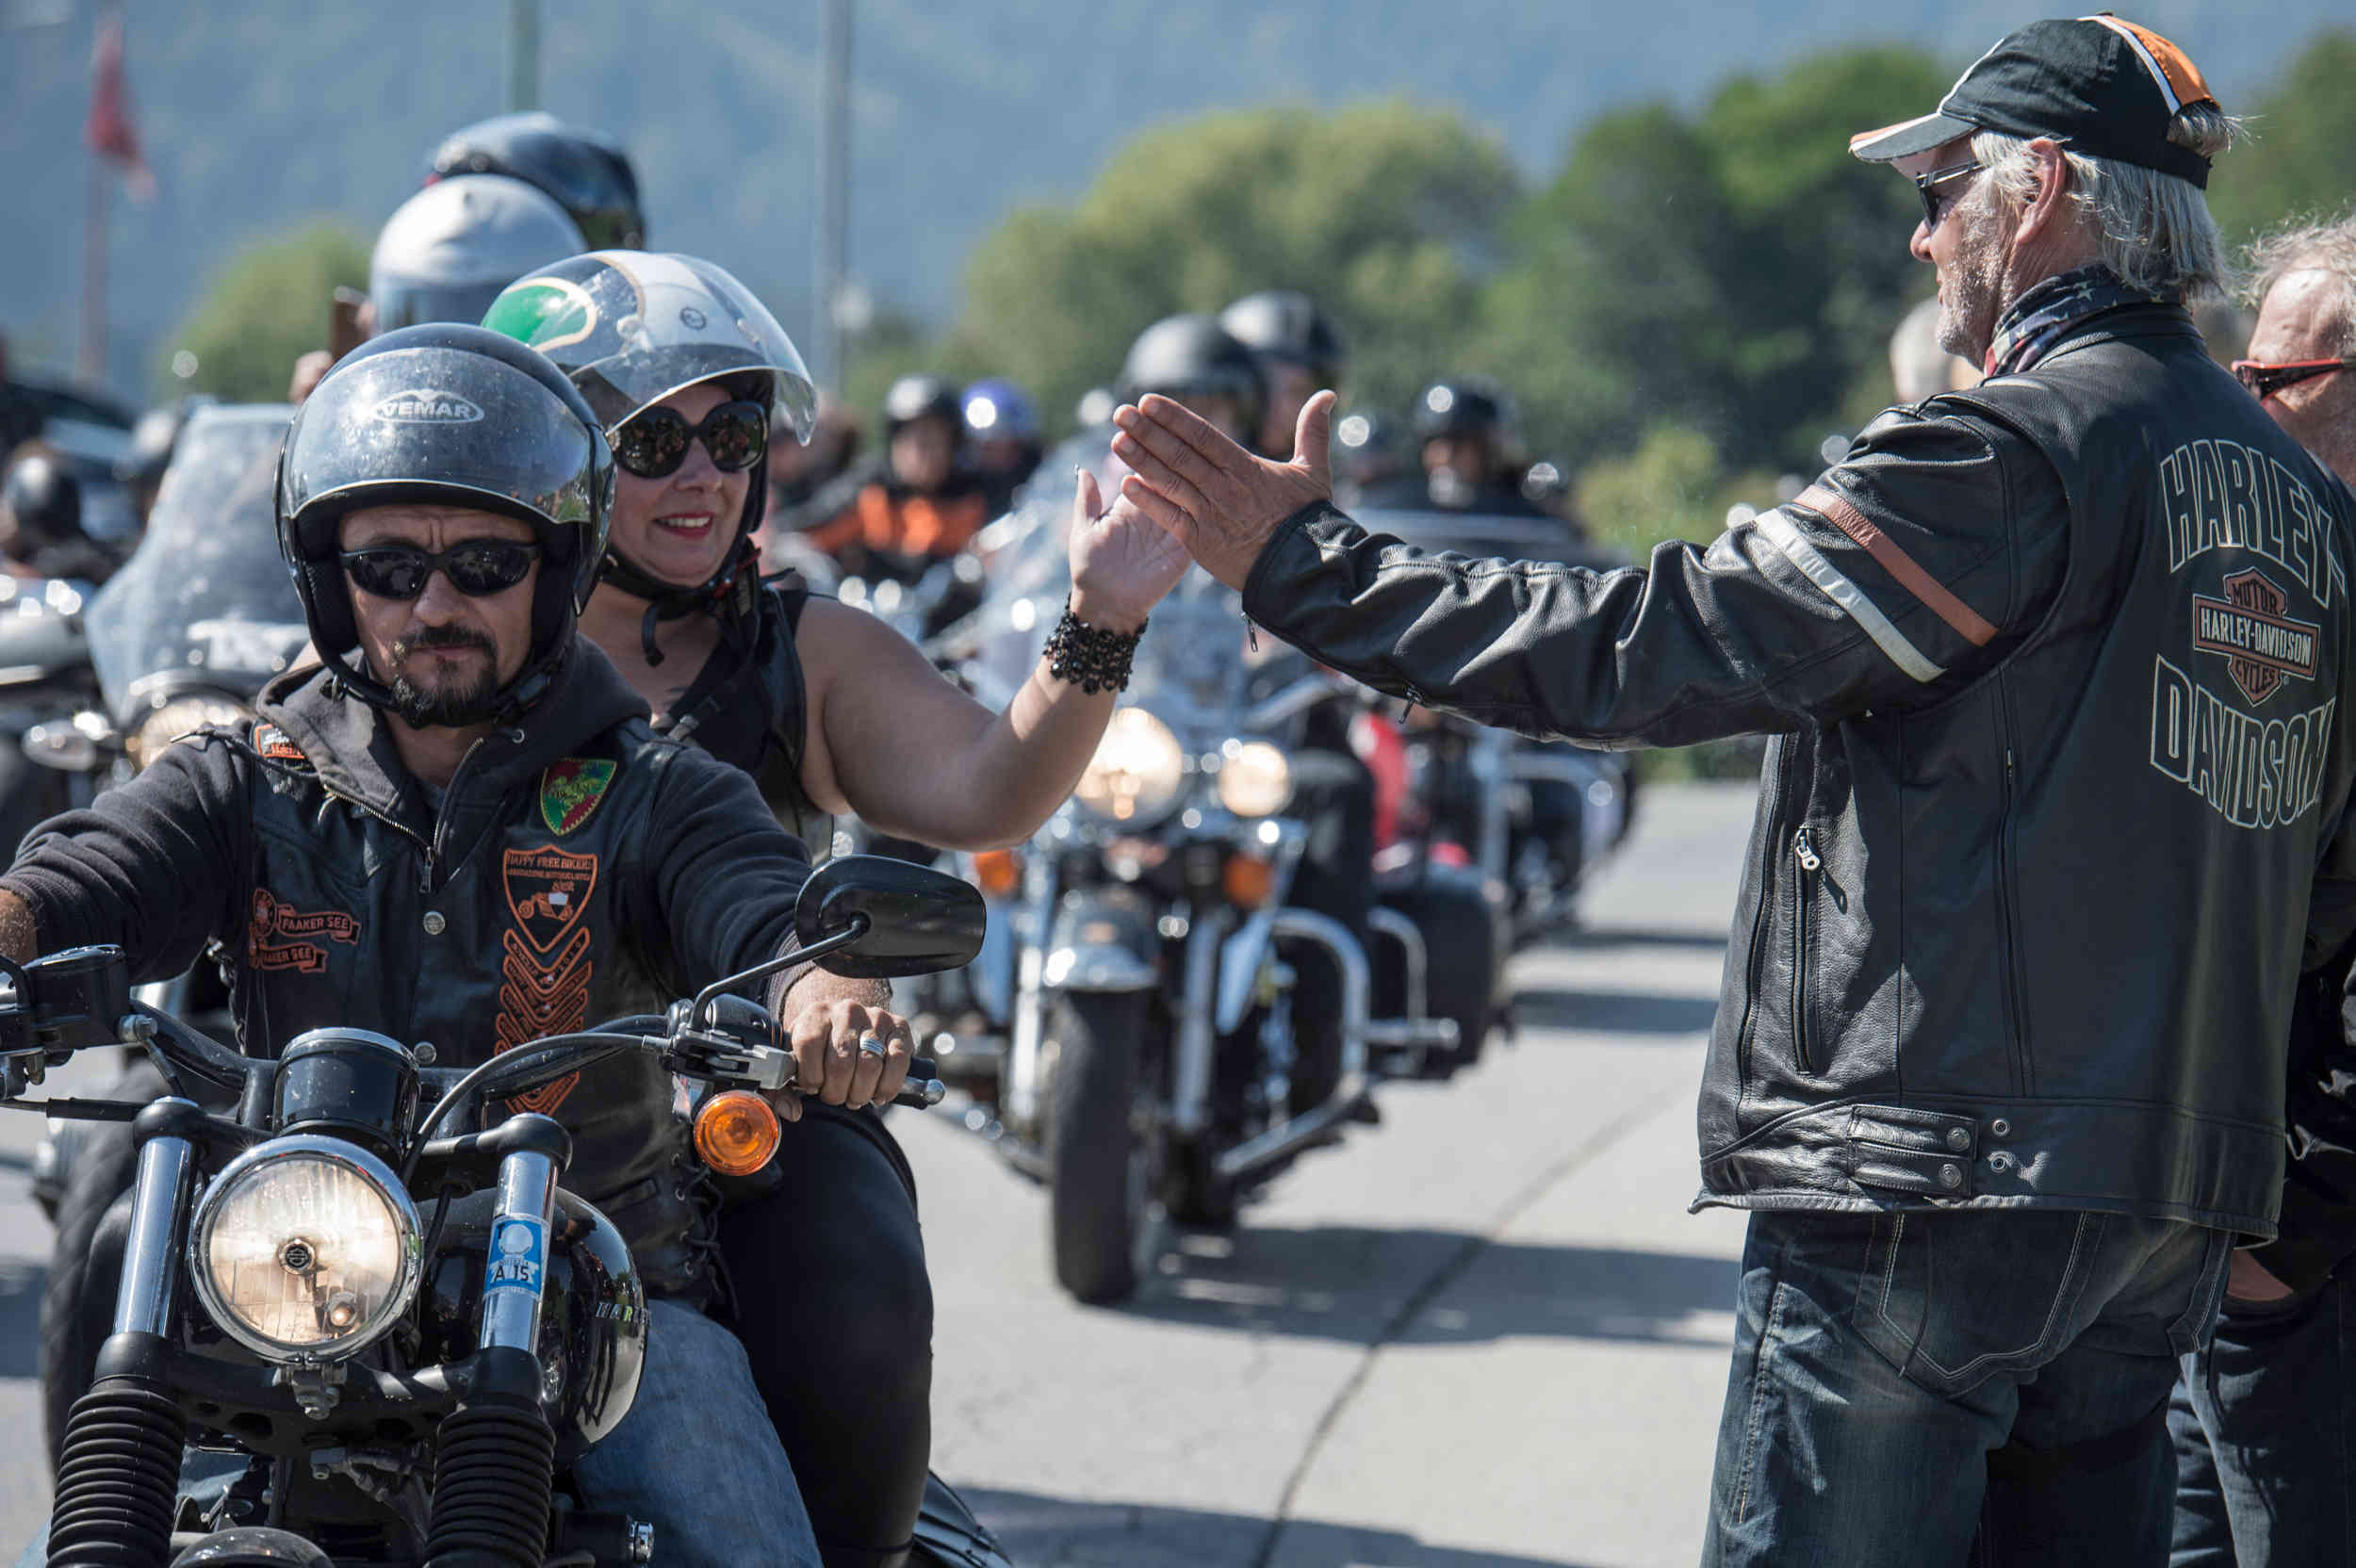 What can companies learn from the Harley-Davidson brand community?